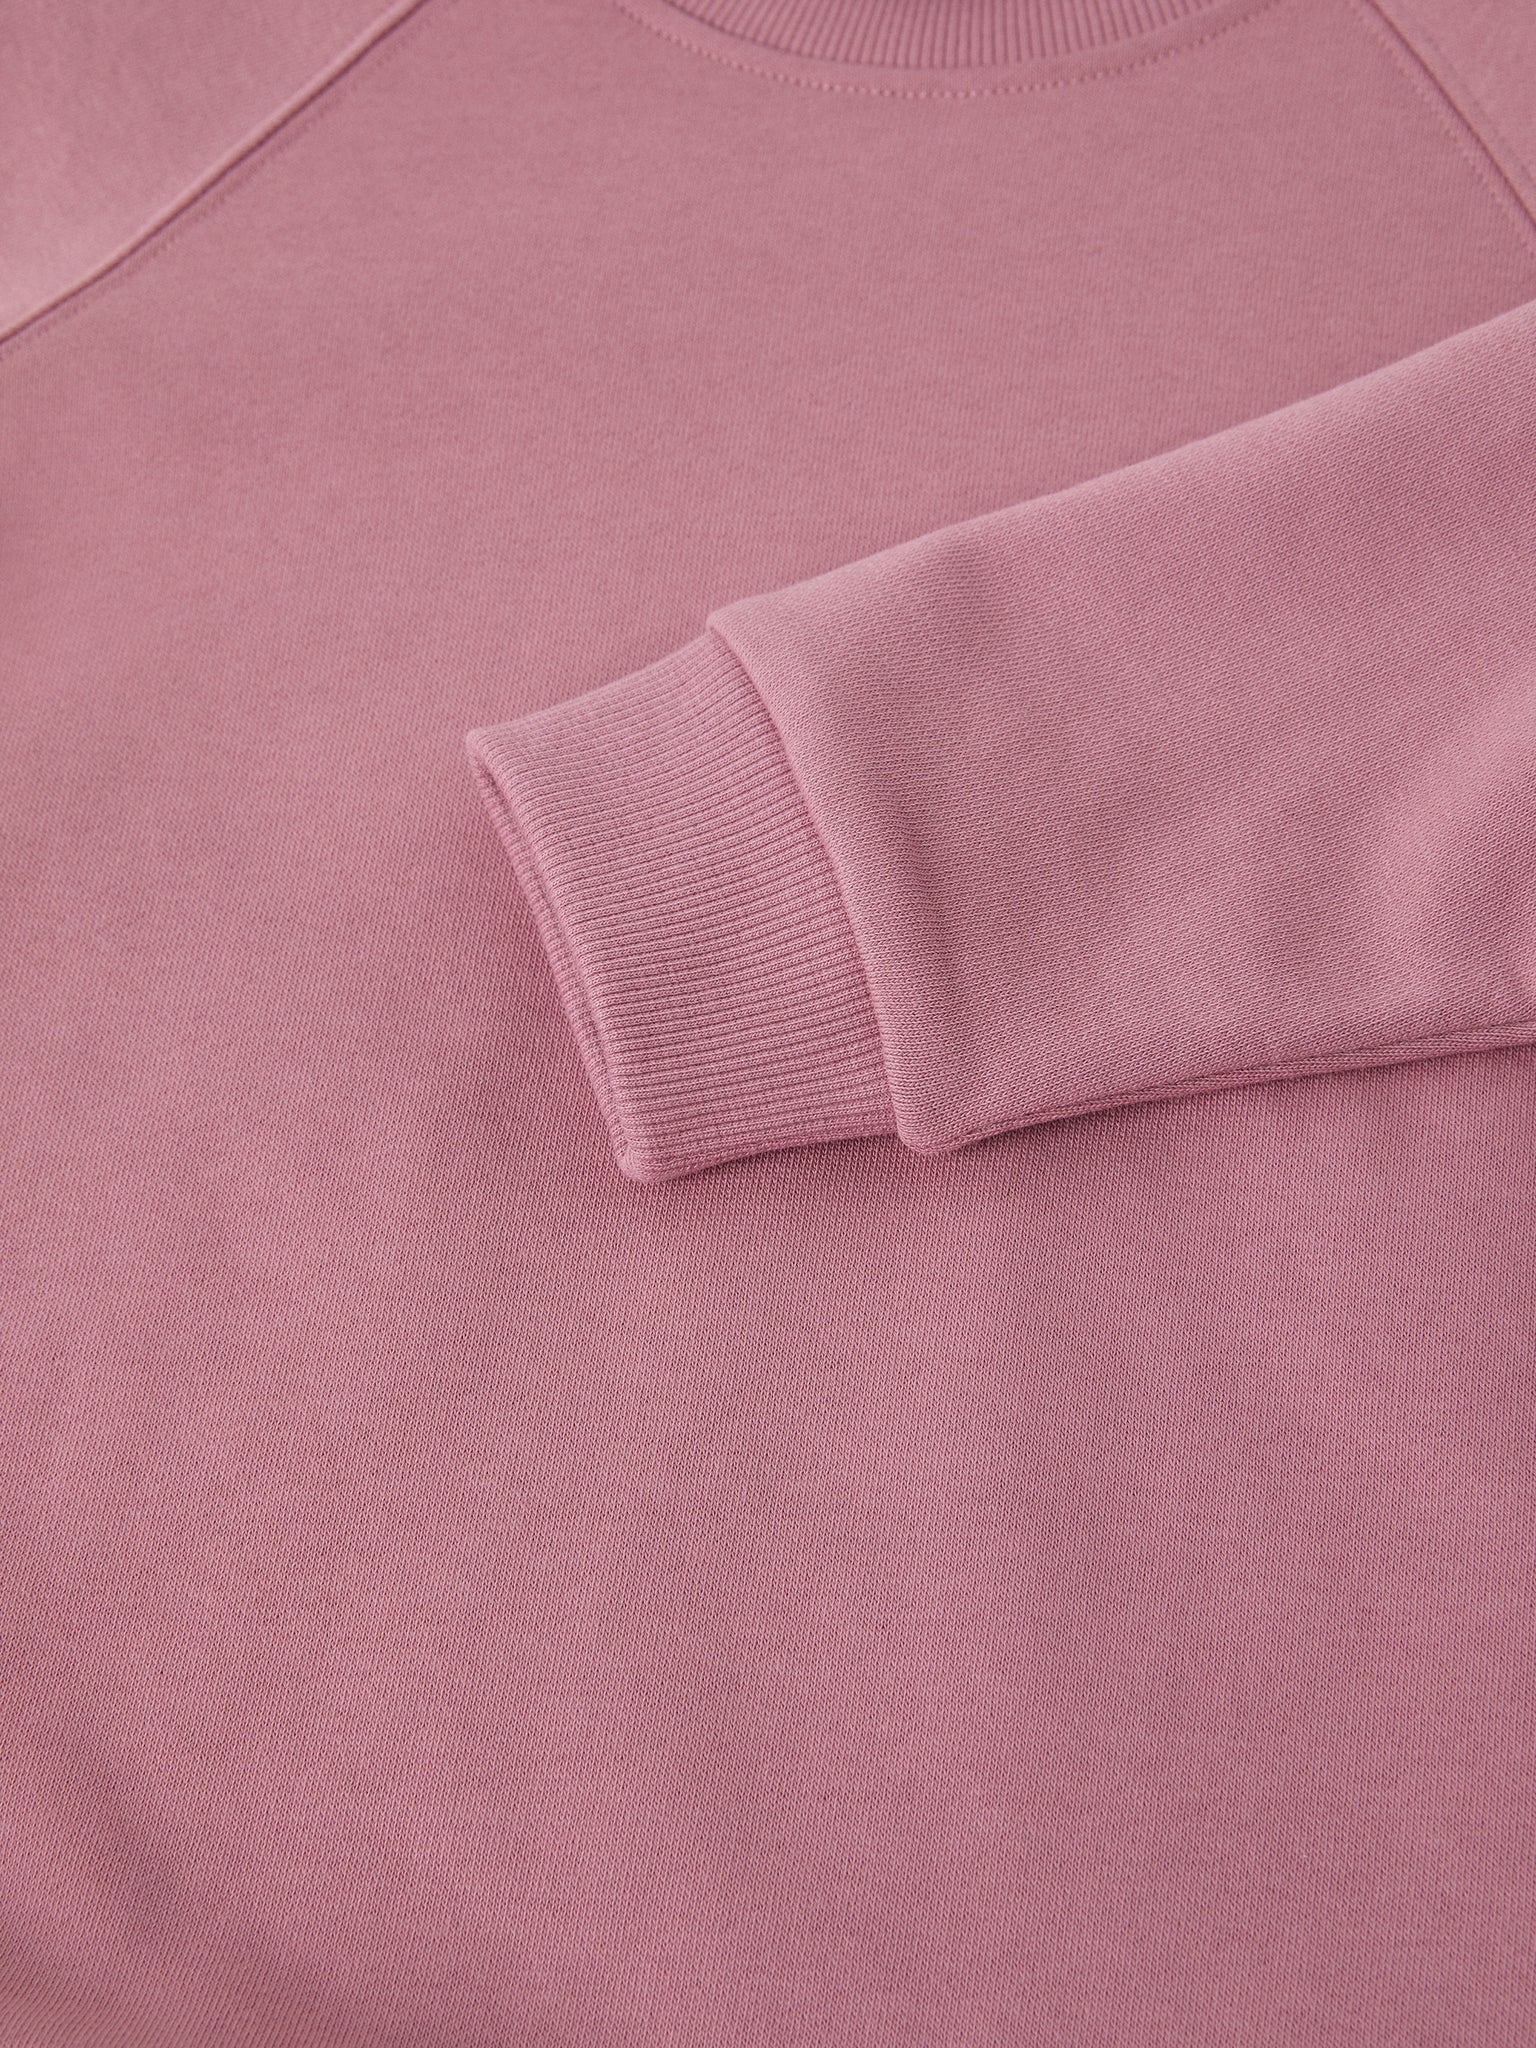 Organic Cotton Pink Kids Sweatshirt from the Polarn O. Pyret kidswear collection. Nordic kids clothes made from sustainable sources.